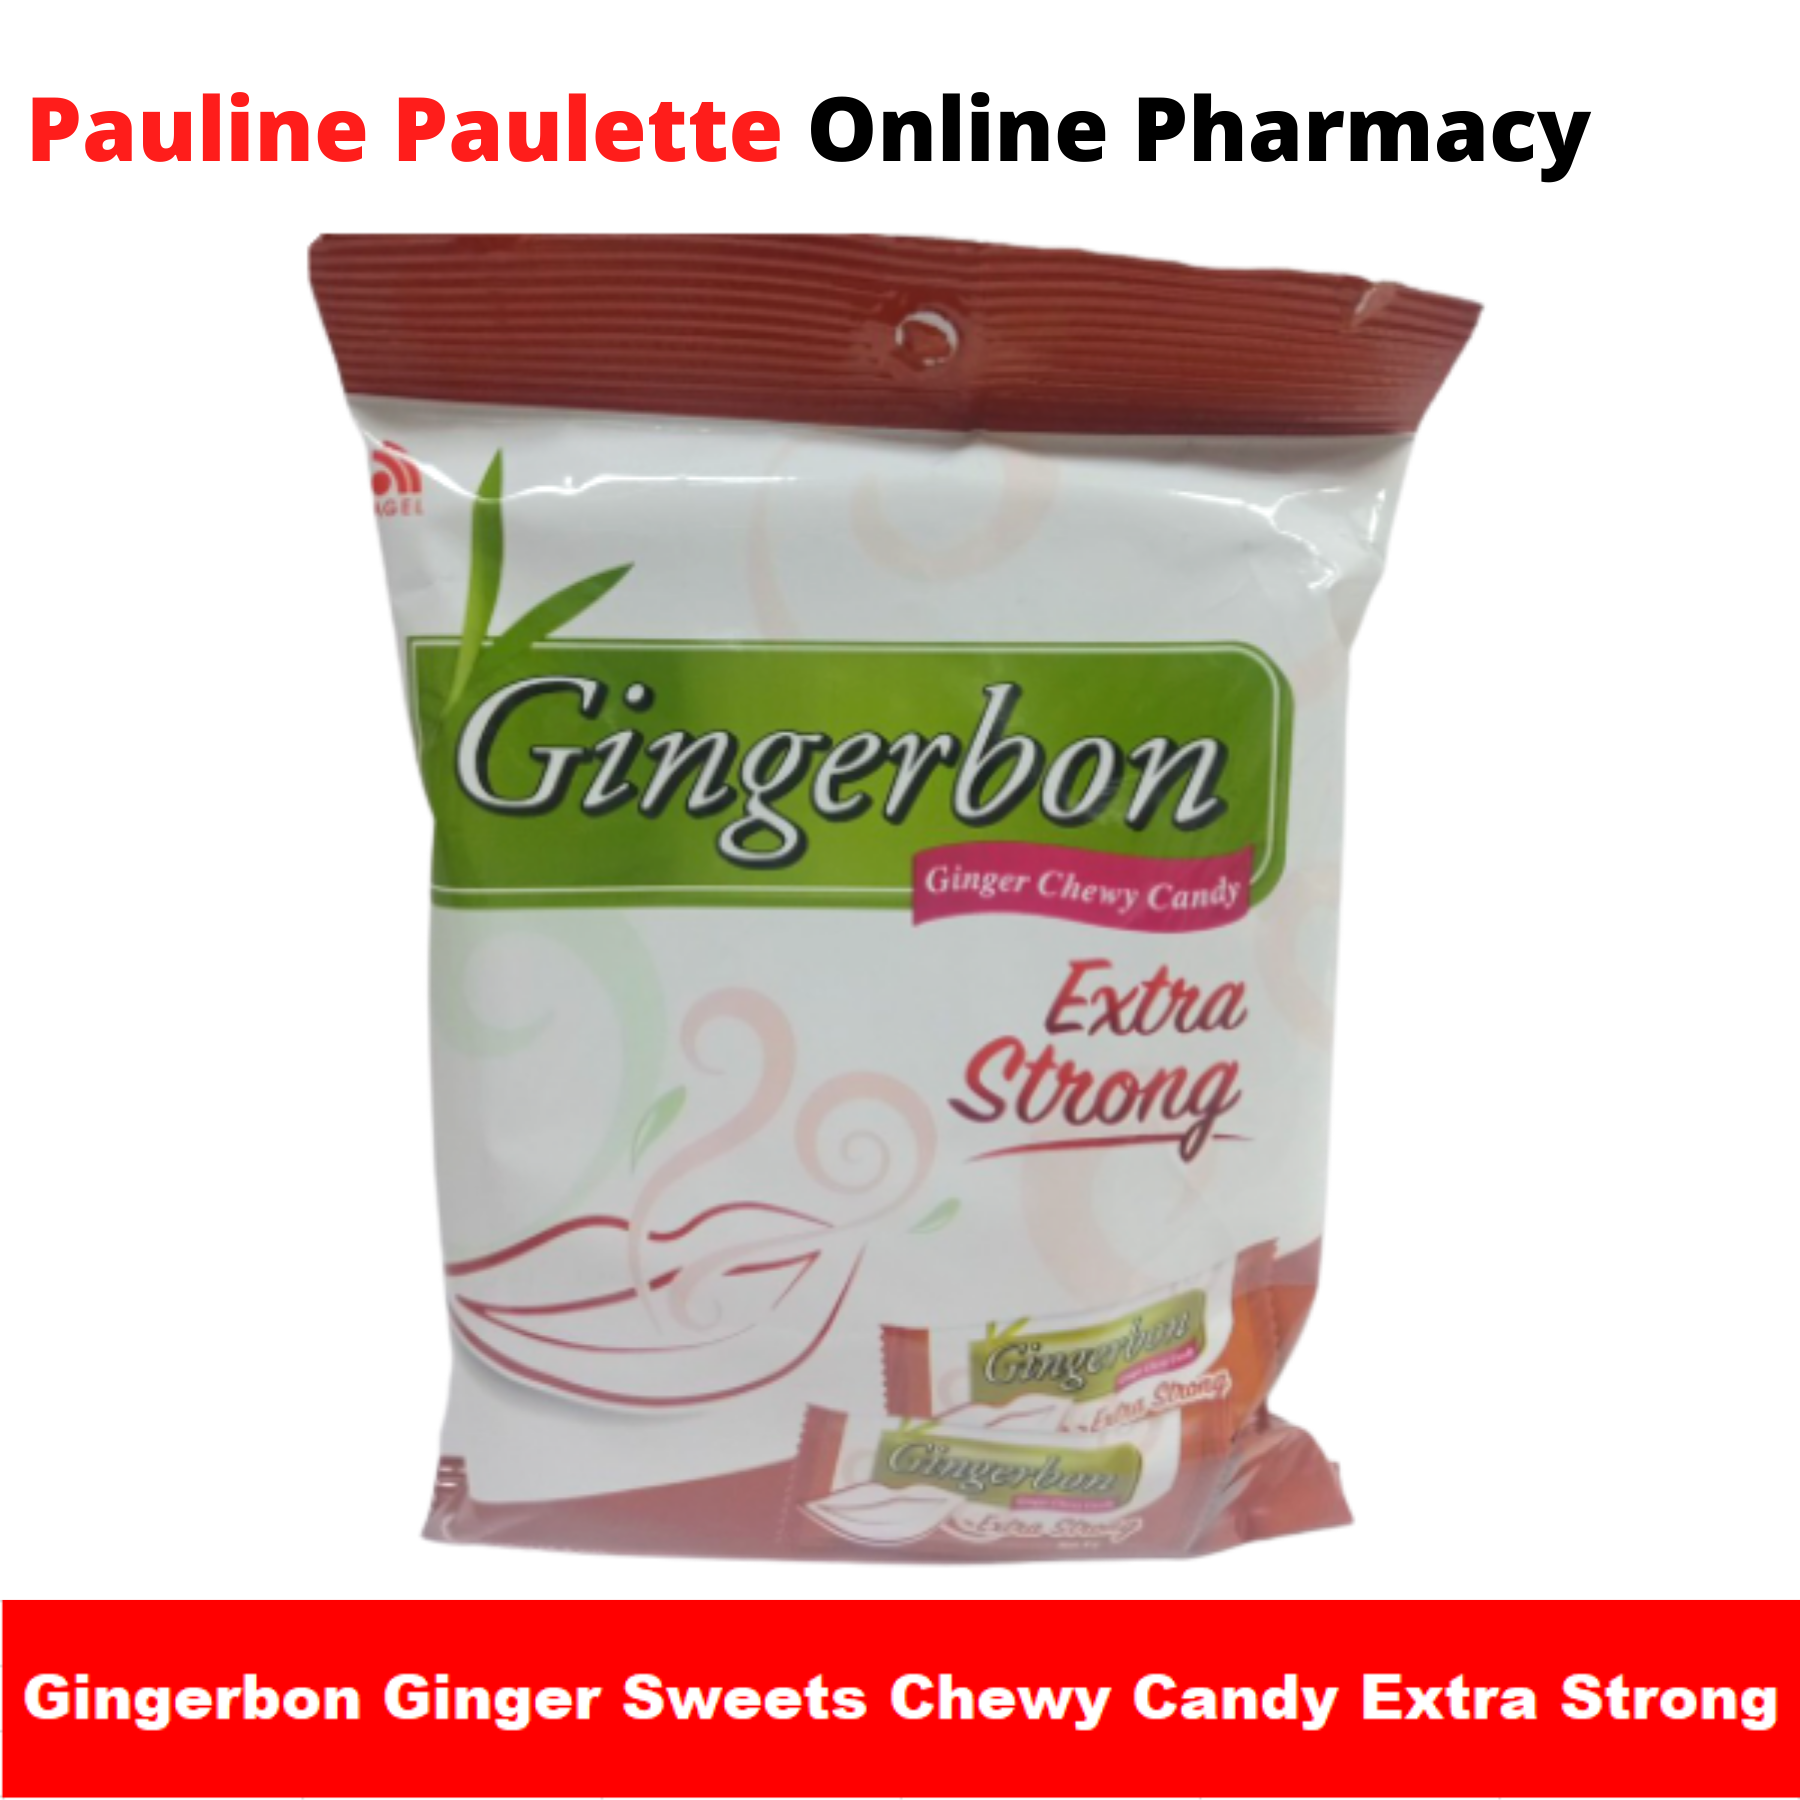 Gingerbon Ginger Sweets Chewy Candy Extra Strong 125g Lazada Ph 6066